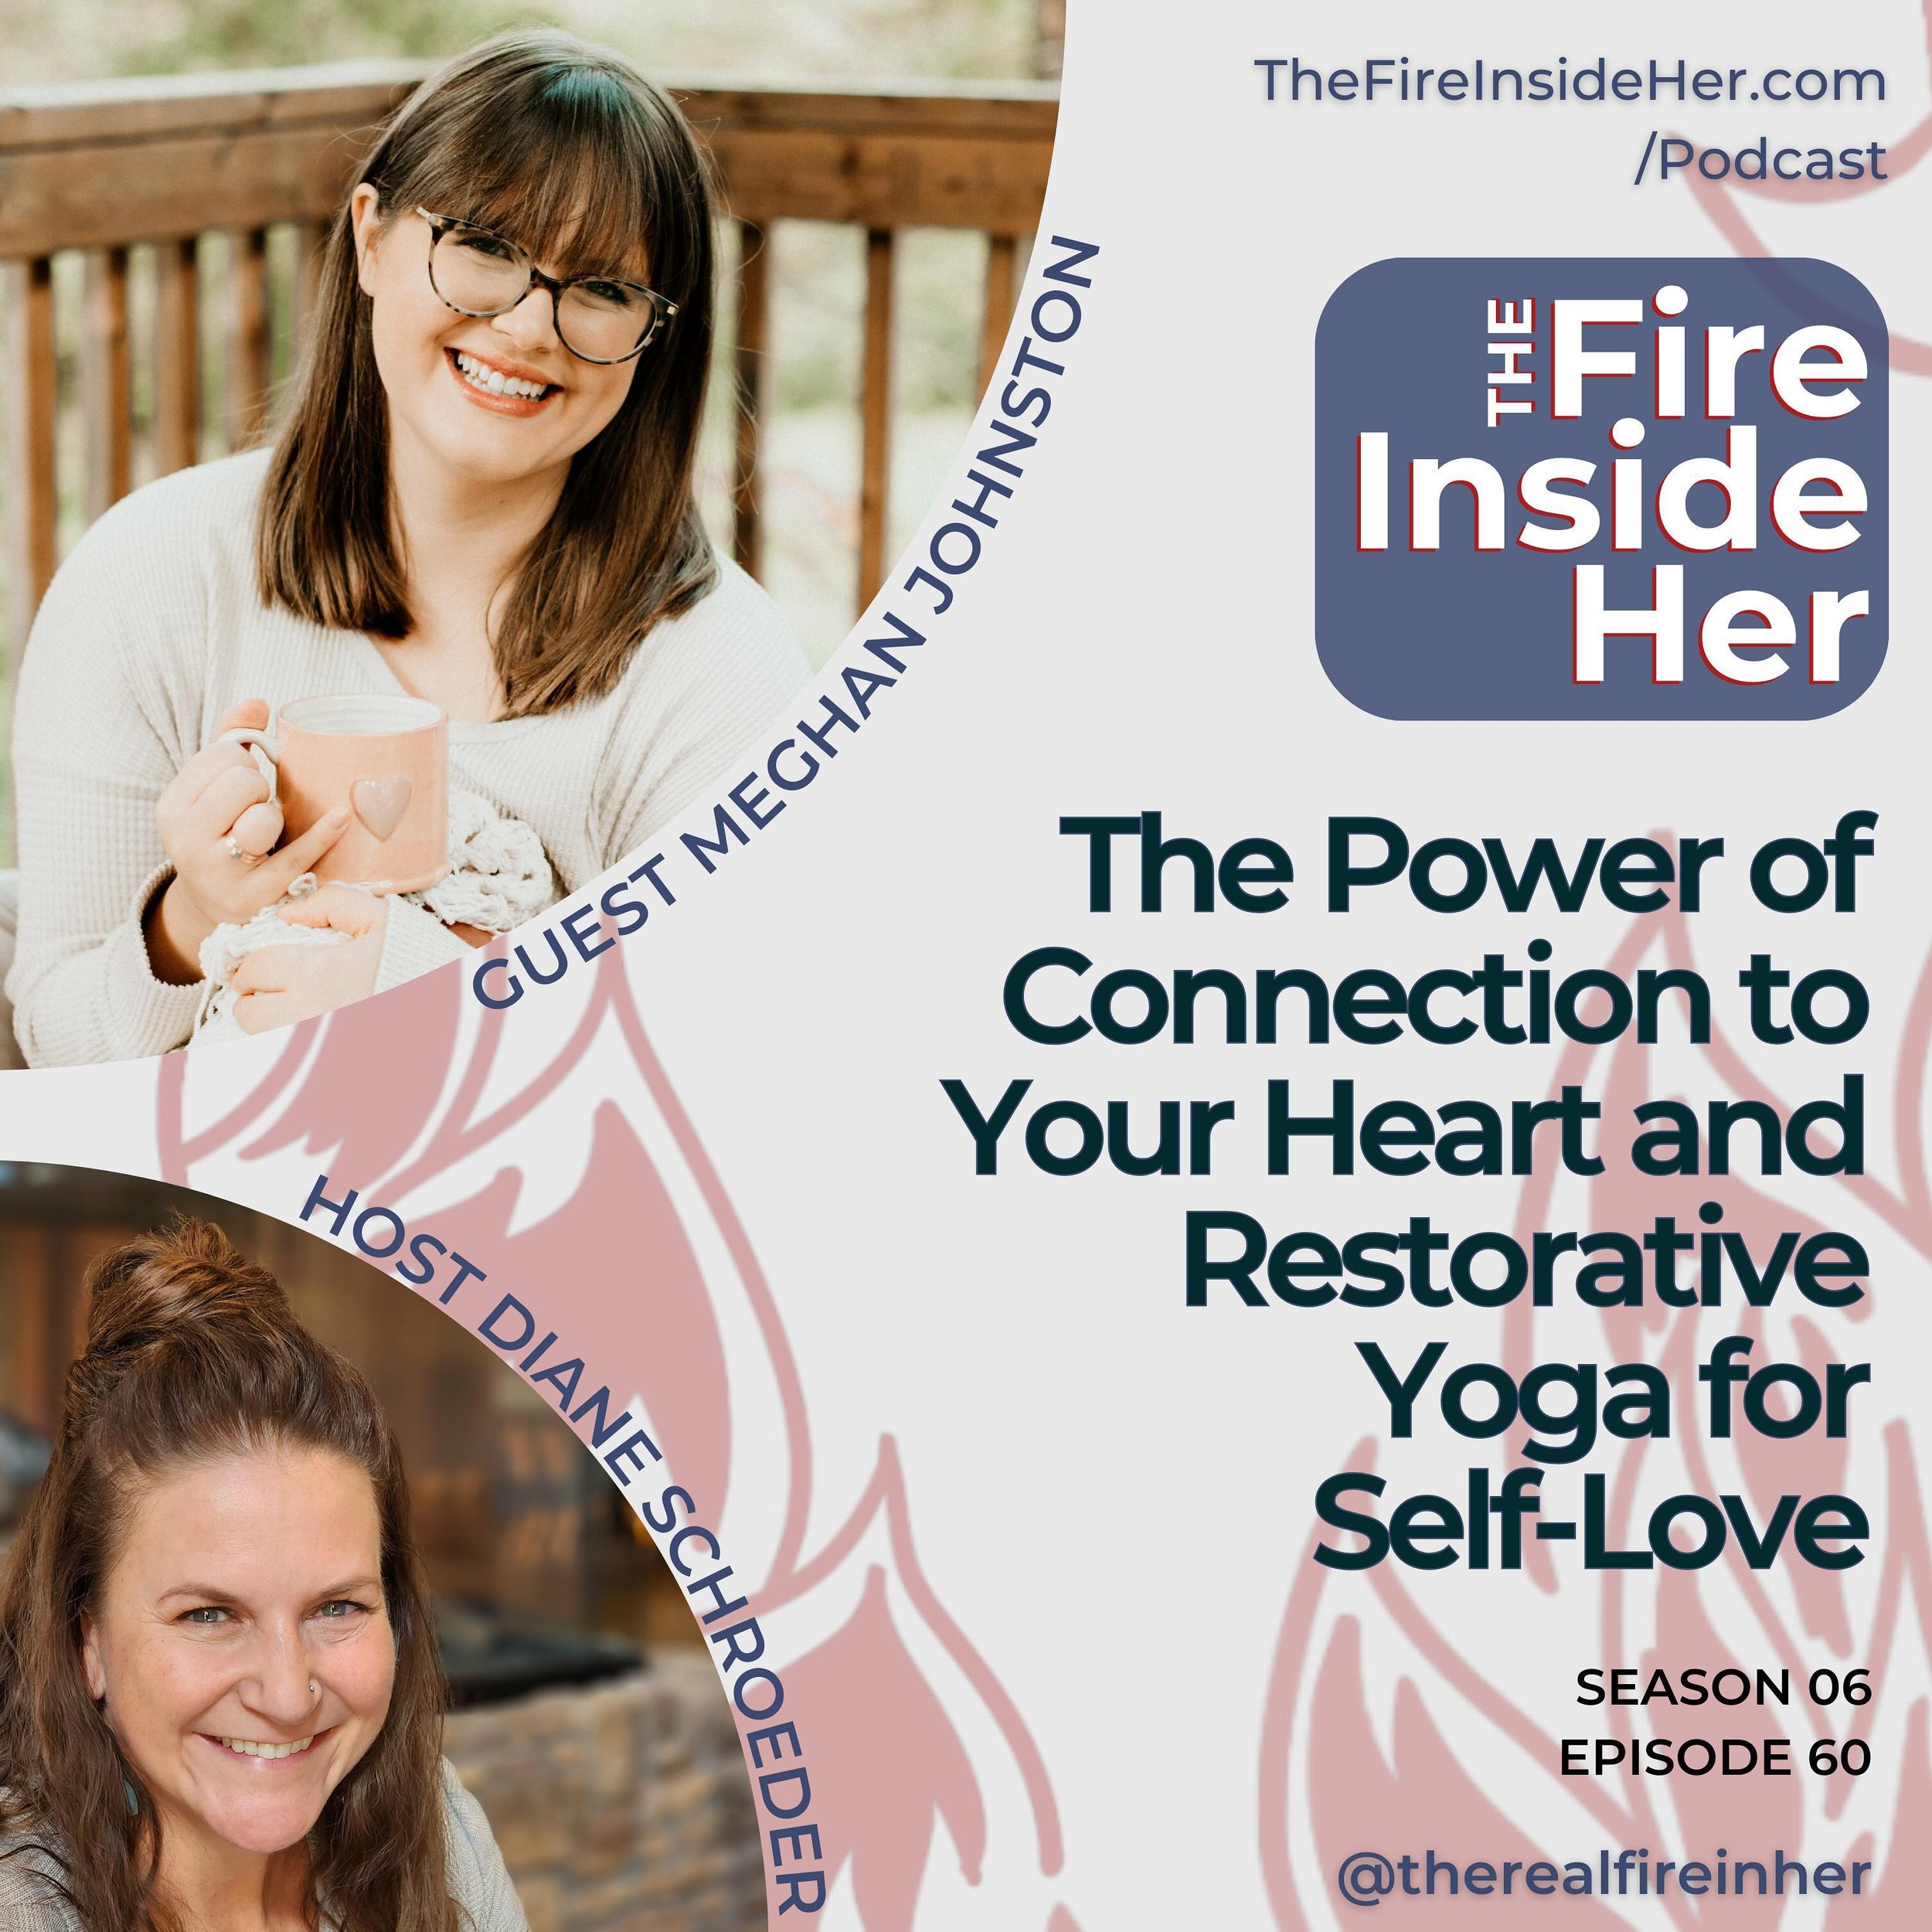 This one is definitely one of my favourite interviews I&rsquo;ve ever done!

It was truly such an honour and a joy to share in conversation with @therealfireinher on The Fire Inside Her 🔥

Former firefighter, Diane Schroeder has created such a heart